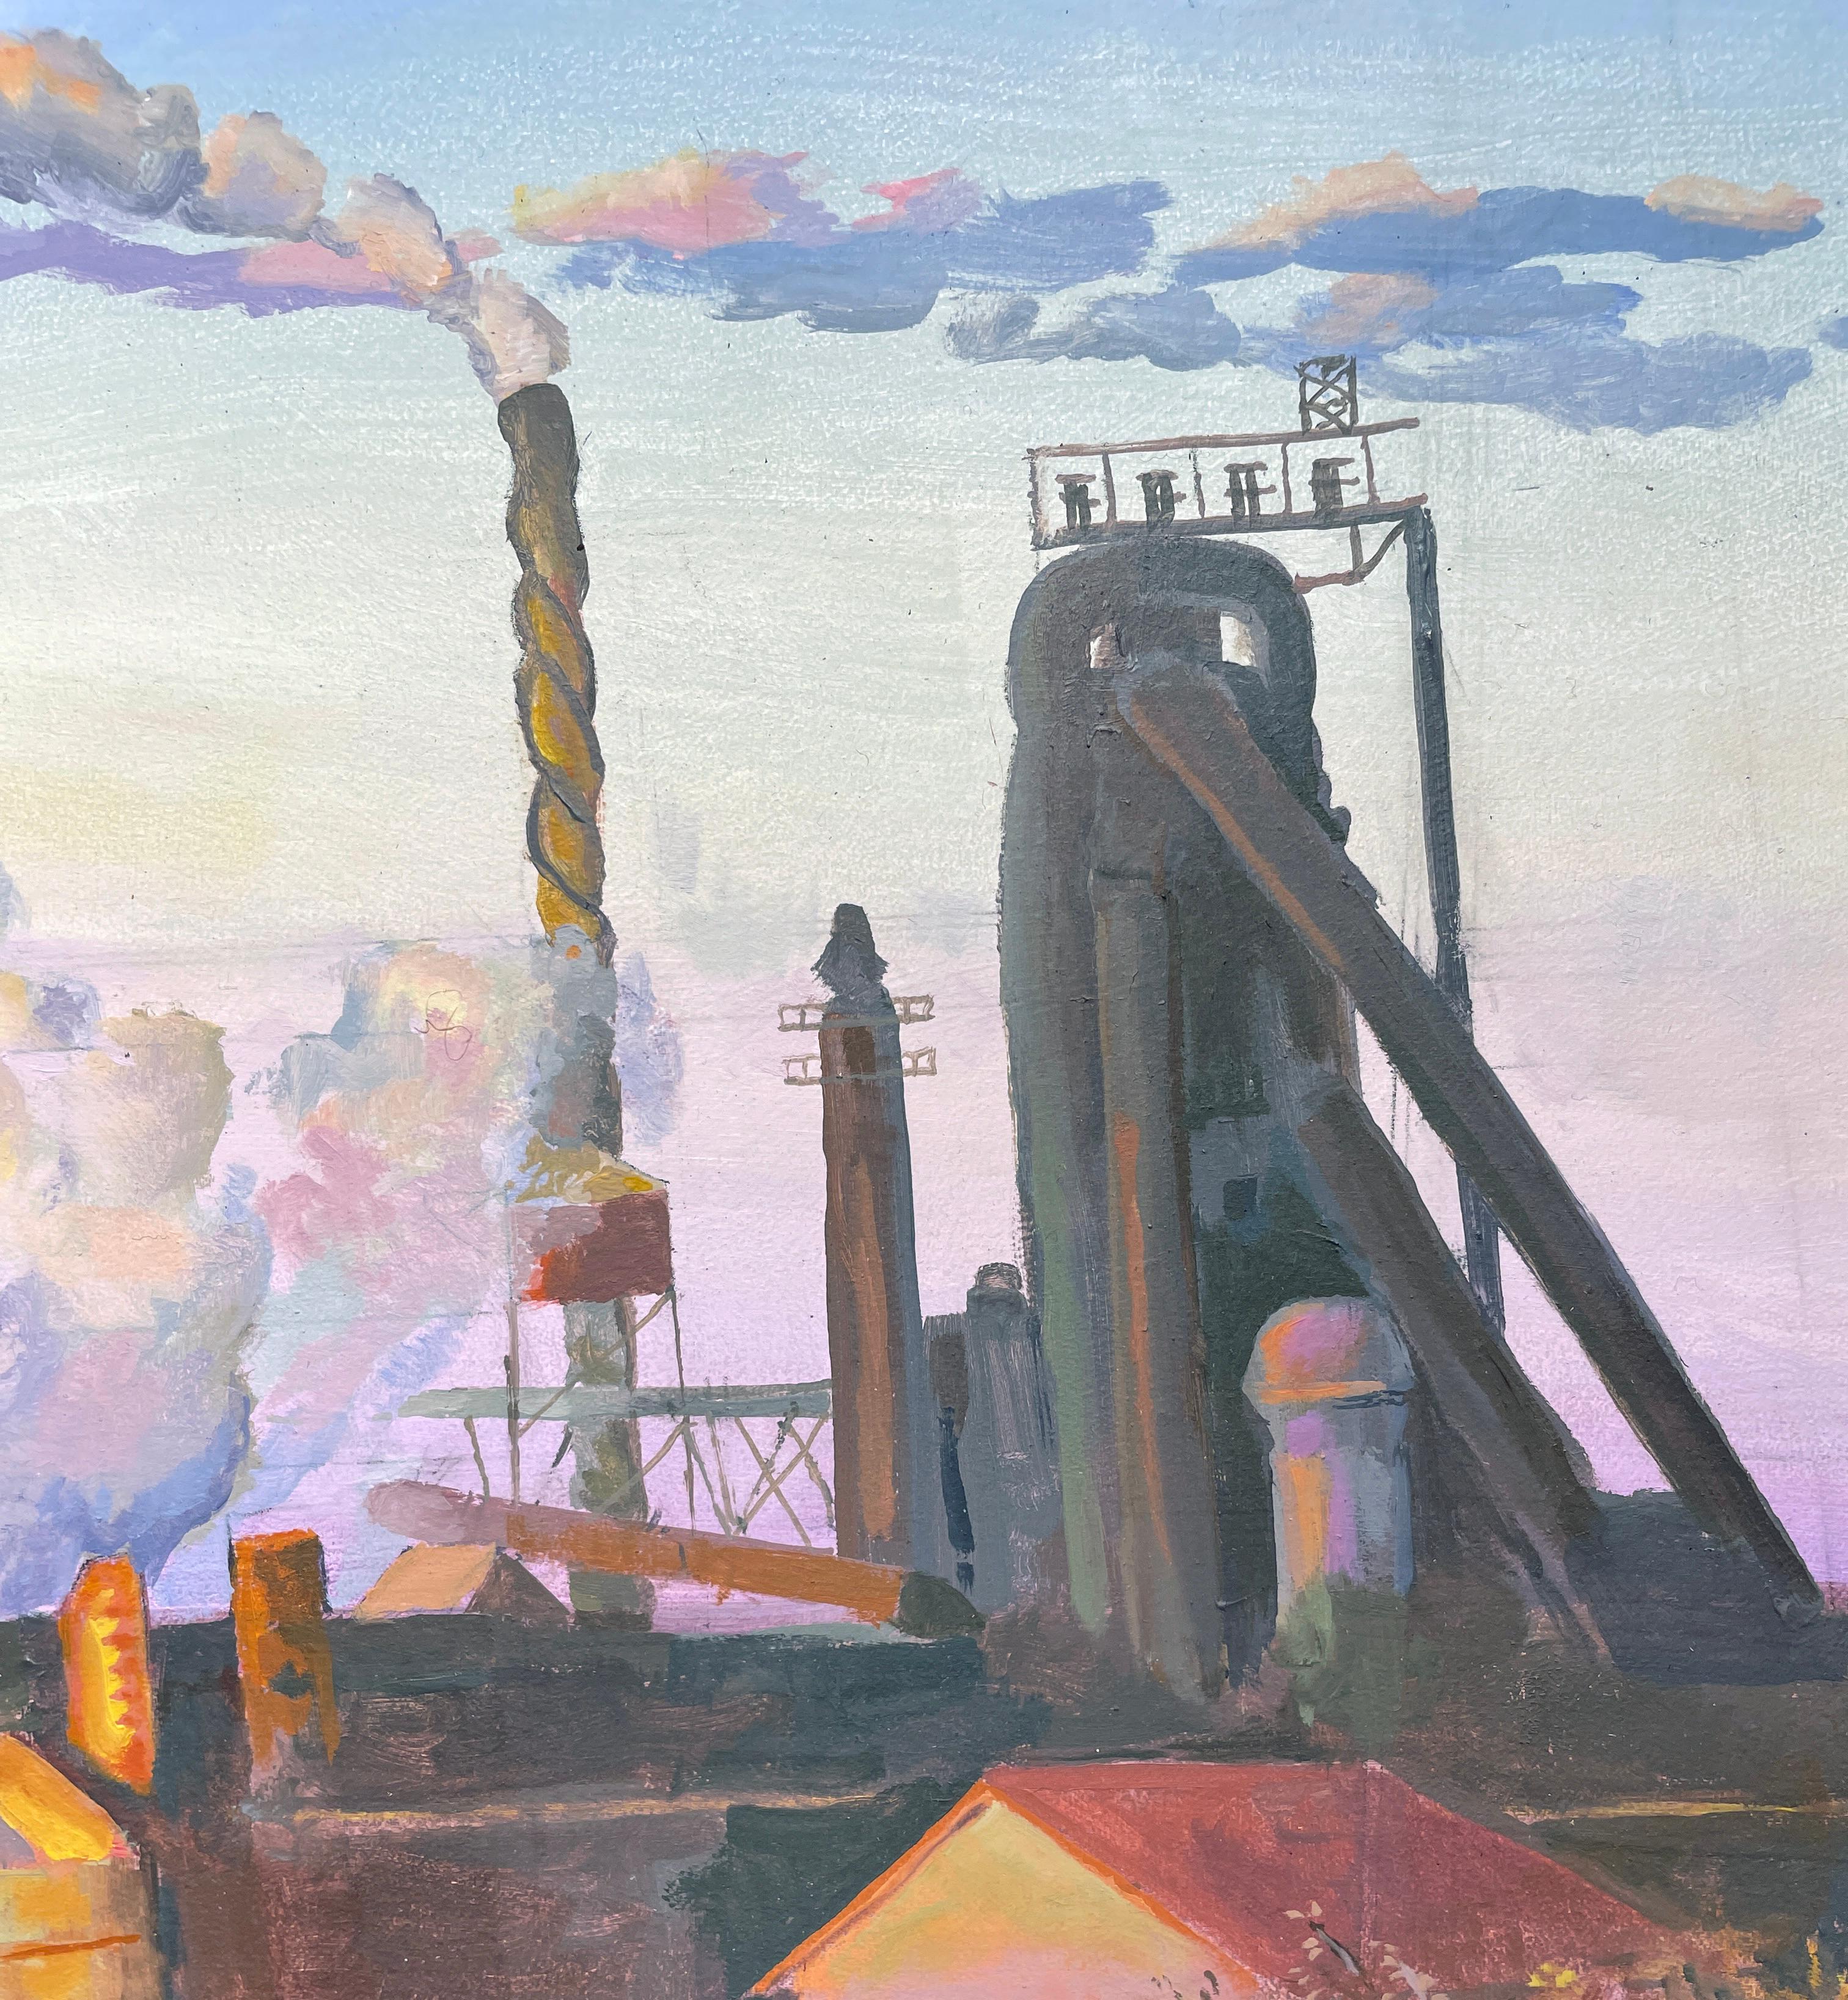  Steel Mills of Gary - Urban Industrial Landscape, Factories with Dramatic Sky - Contemporary Painting by Art Chartow